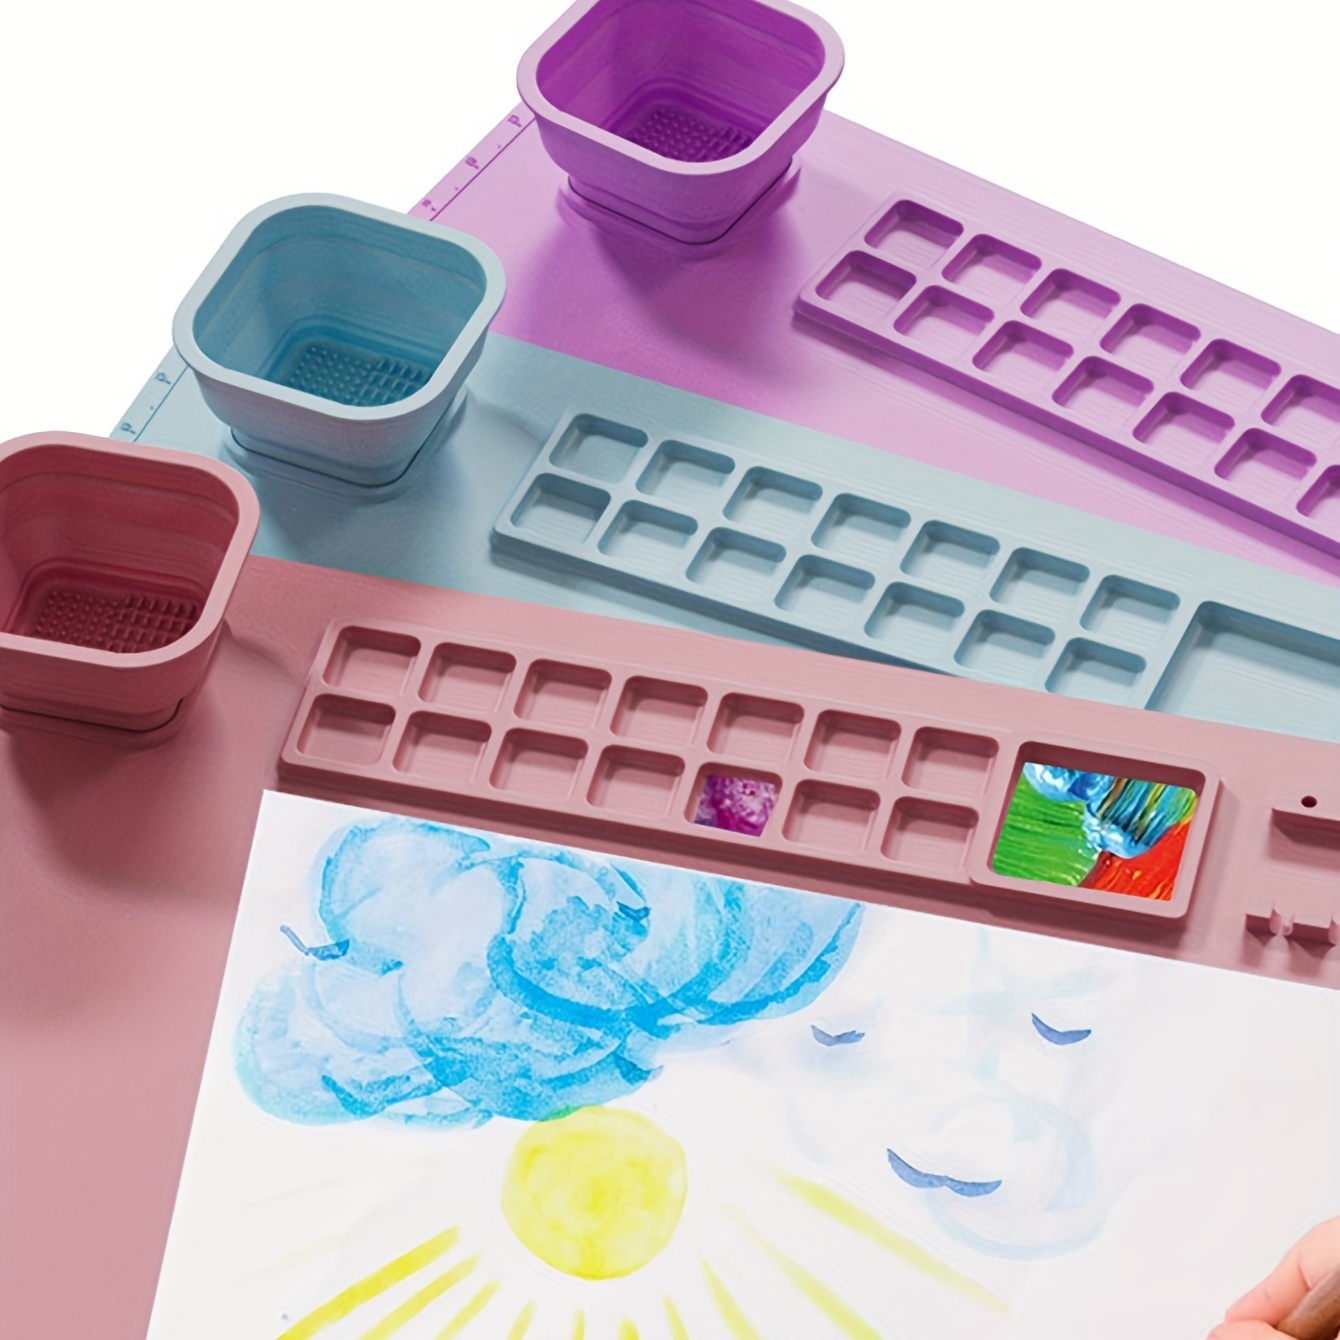  QualiProd Silicone Painting Mat with Cup – Silicone